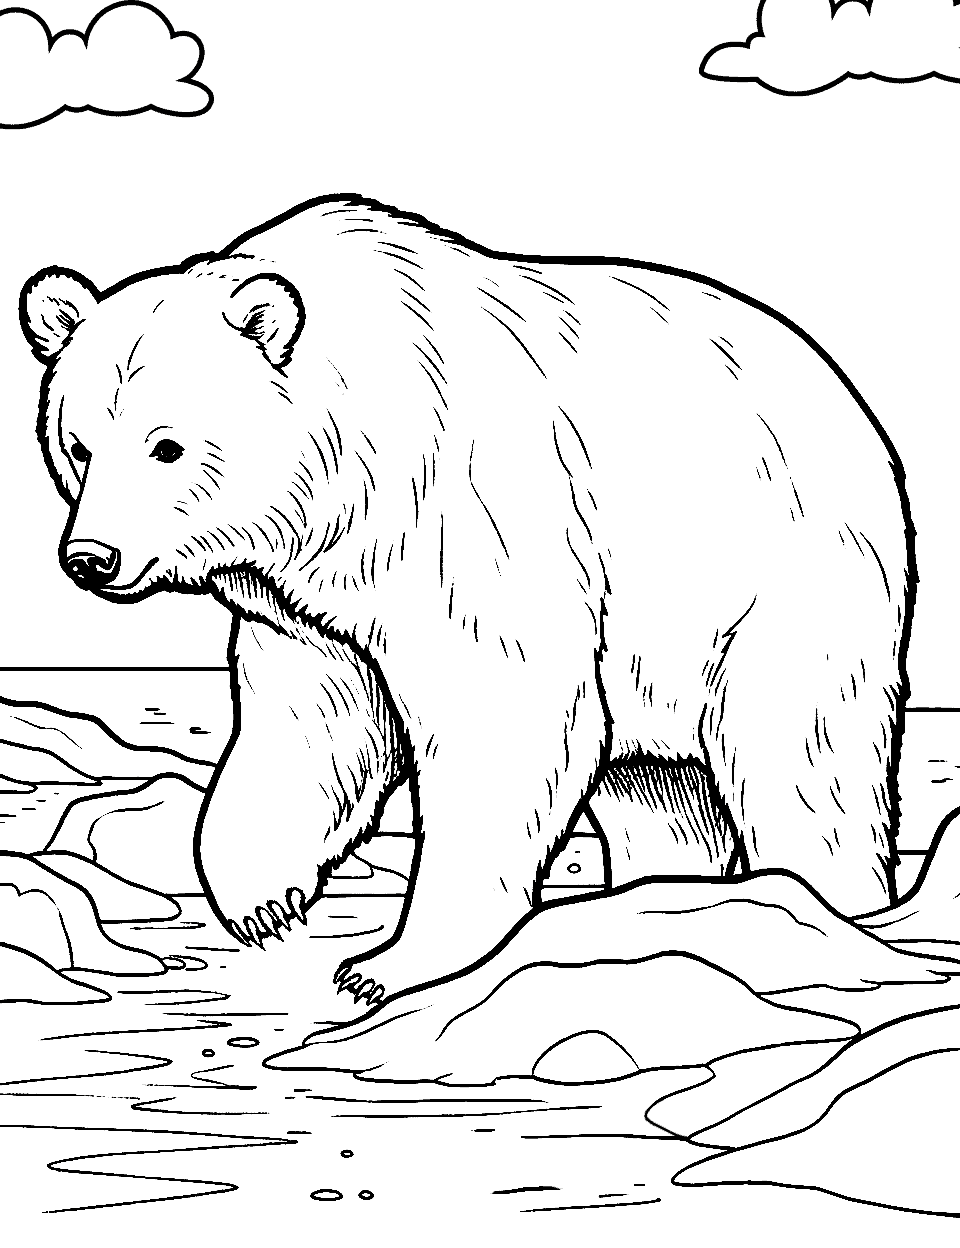 Grizzly Bear Fishing Coloring Page - A grizzly bear looking to catch a fish in a rushing river.